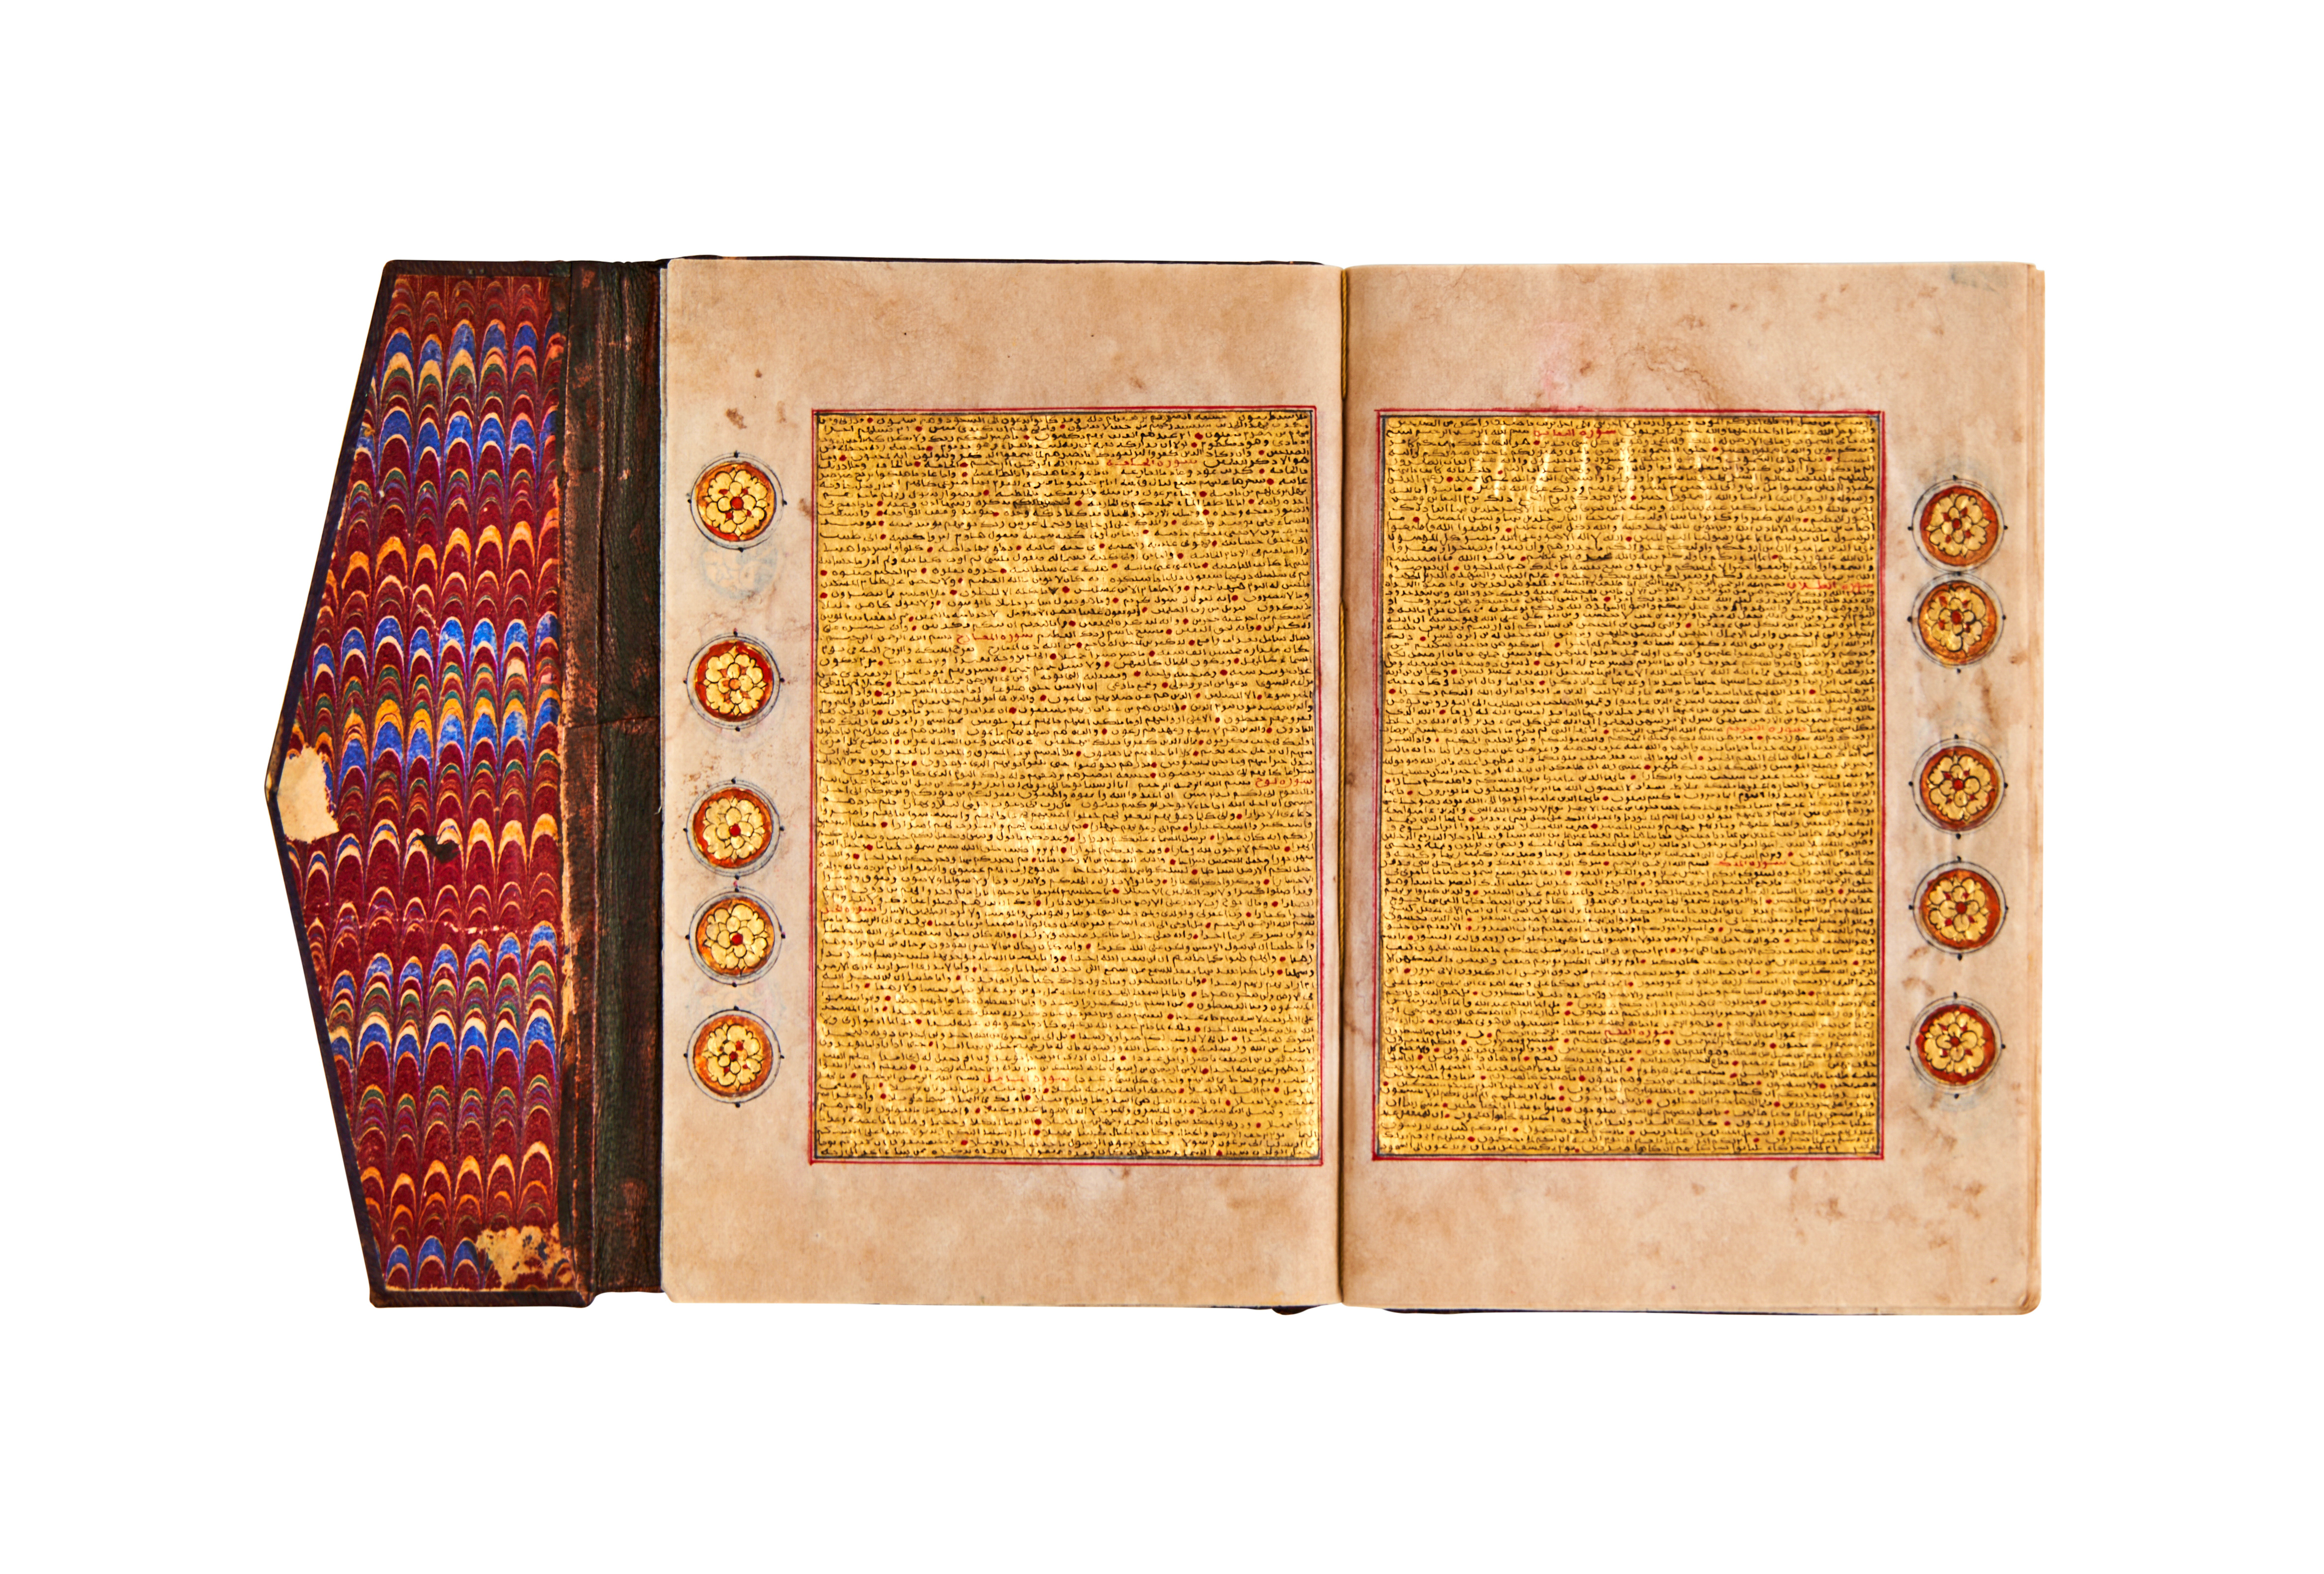 A COMPLETE GOLD MINIATURE QURAN, FOR HIS EXCELLENCE ABU ABDALLAH YUSEF, DATED 1288AH, COPIED BY FAT - Image 6 of 9